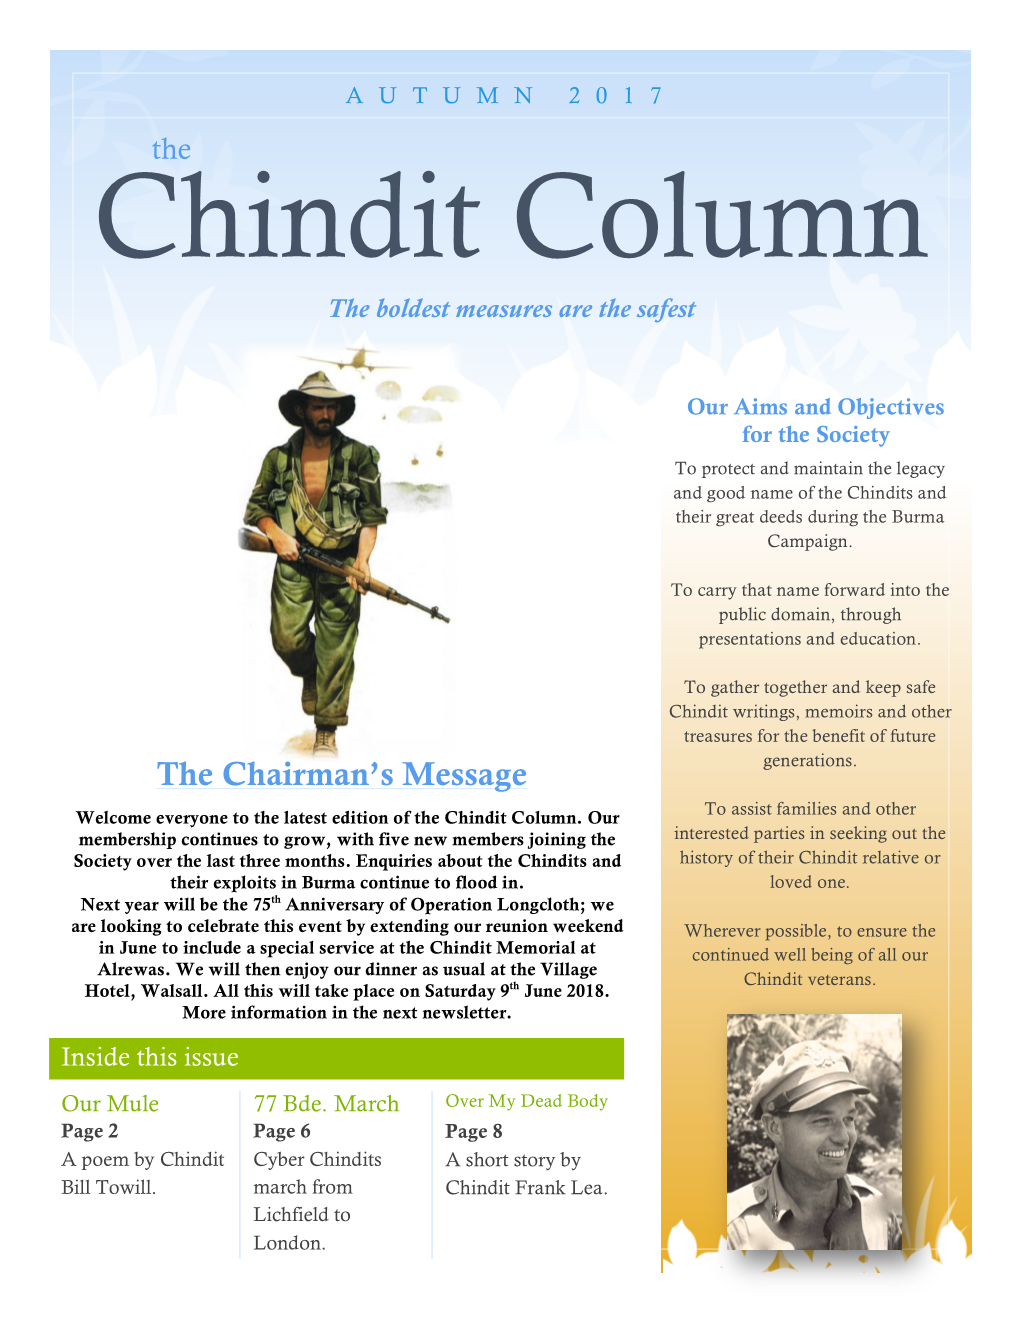 AUTUMN 2017 the Chindit Column the Boldest Measures Are the Safest